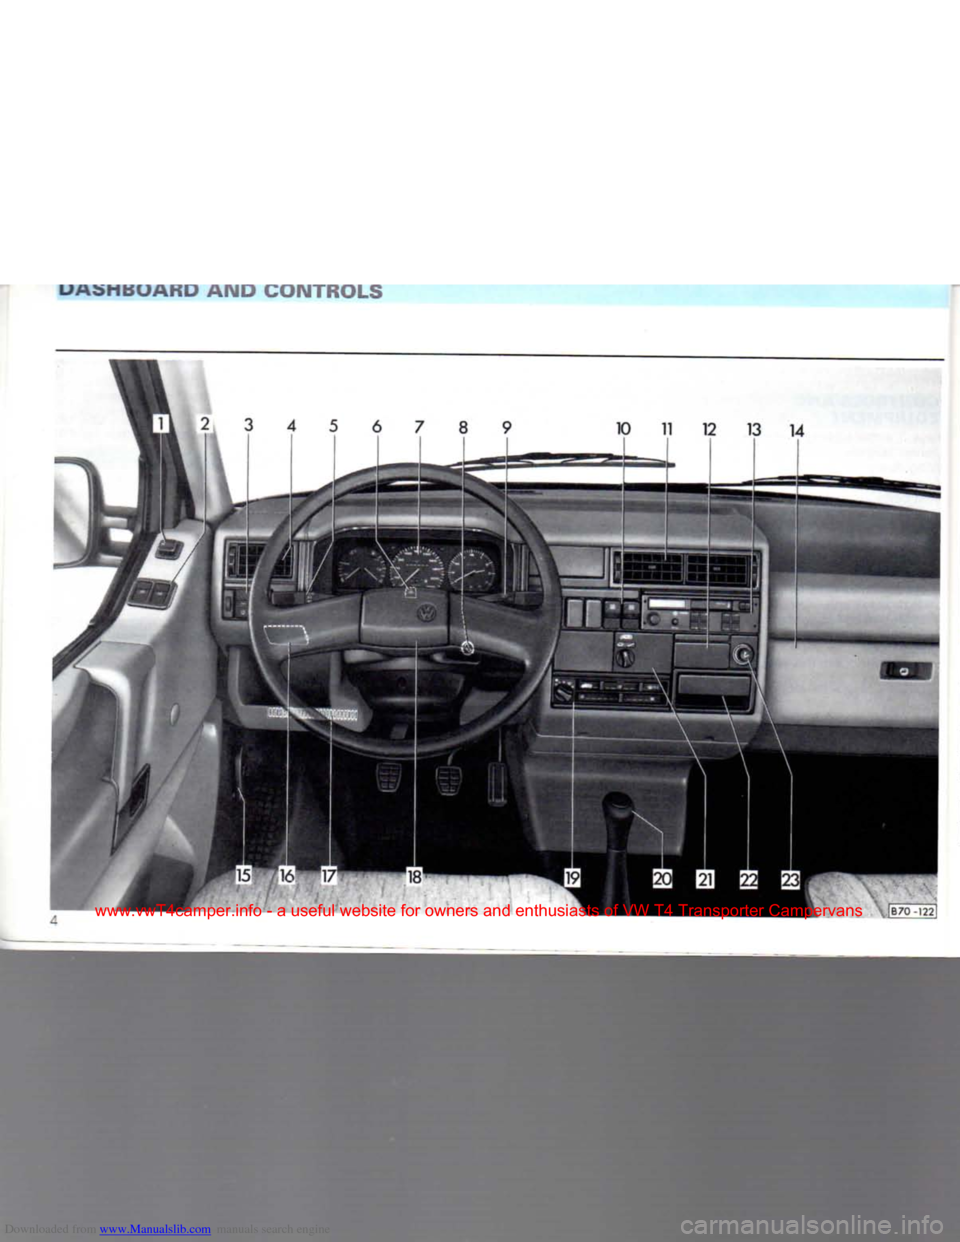 VOLKSWAGEN TRANSPORTER 1992 T4 / 4.G Owners Manual Downloaded from www.Manualslib.com manuals search engine 
LI
 Aon
 BOARD AND CONTROLS 
www.vwT4camper.info  - a  useful  website  for owners  and enthusiasts  of VW  T4 Transporter  Campervans   